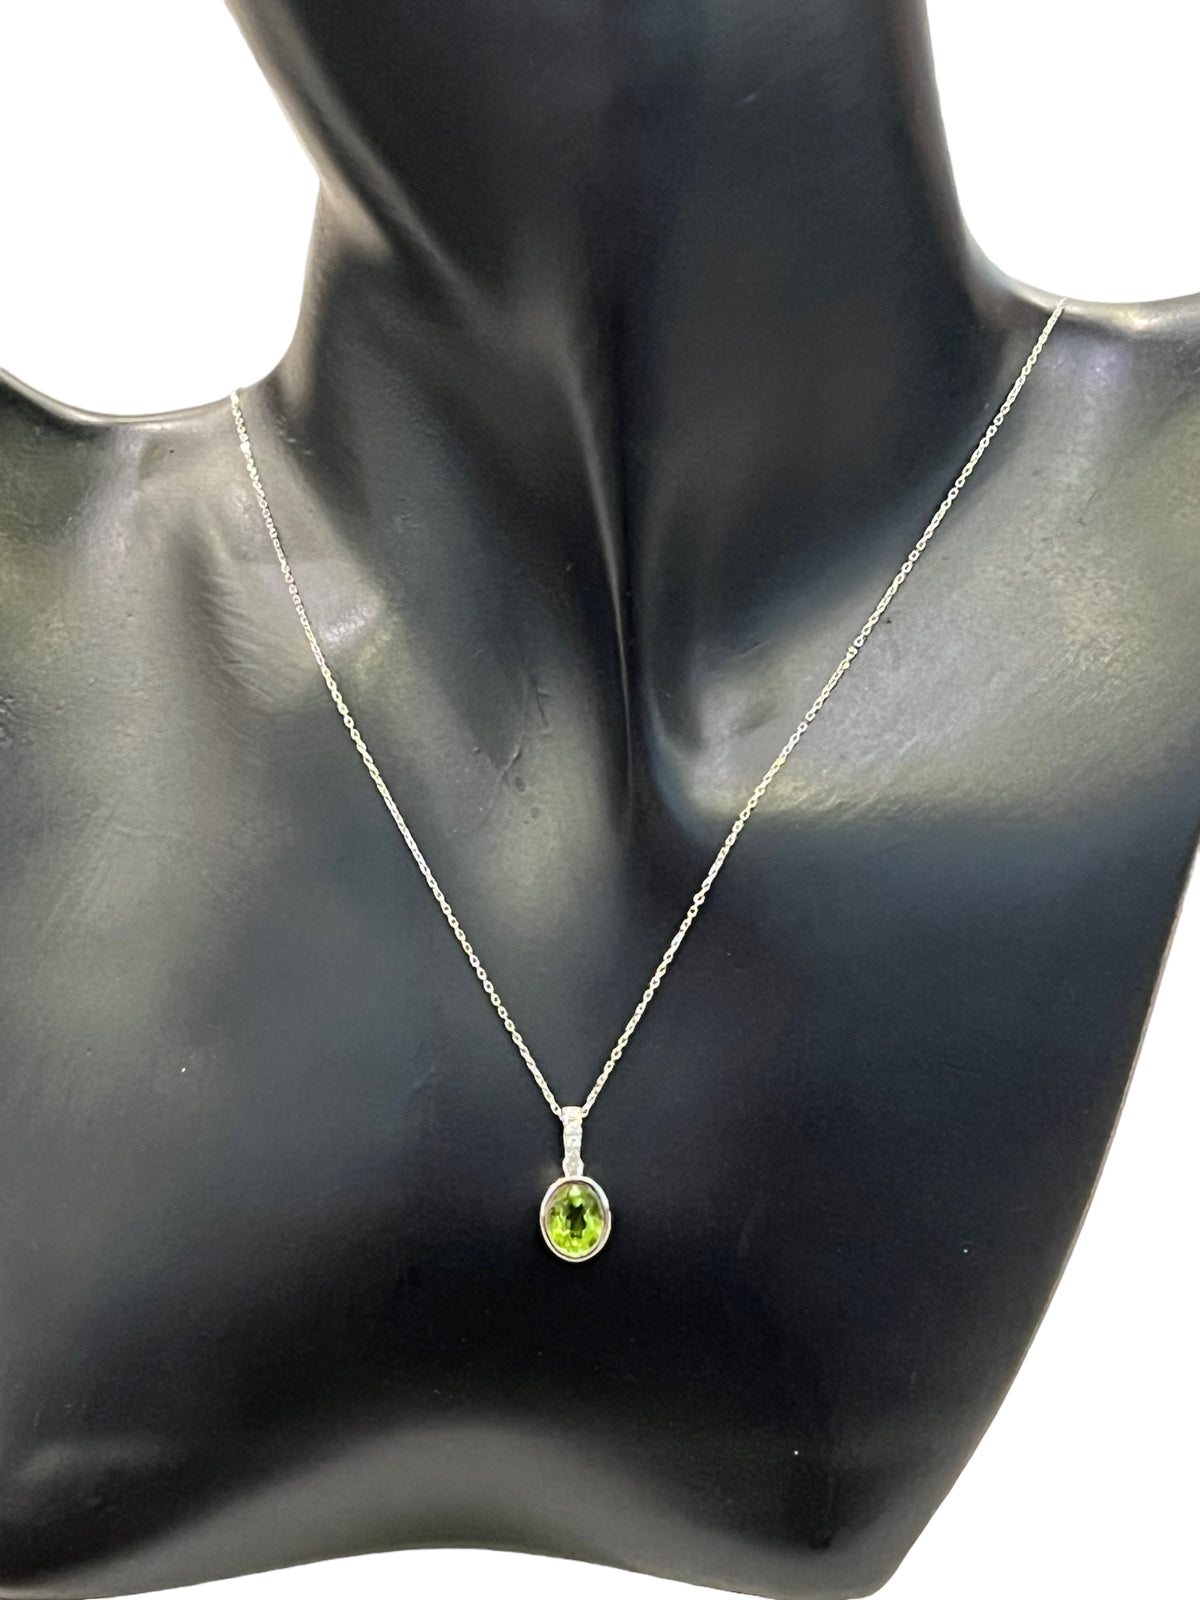 14K White Gold 1.35cttw Peridot and 0.06cttw Diamond Necklace - 18 Inches